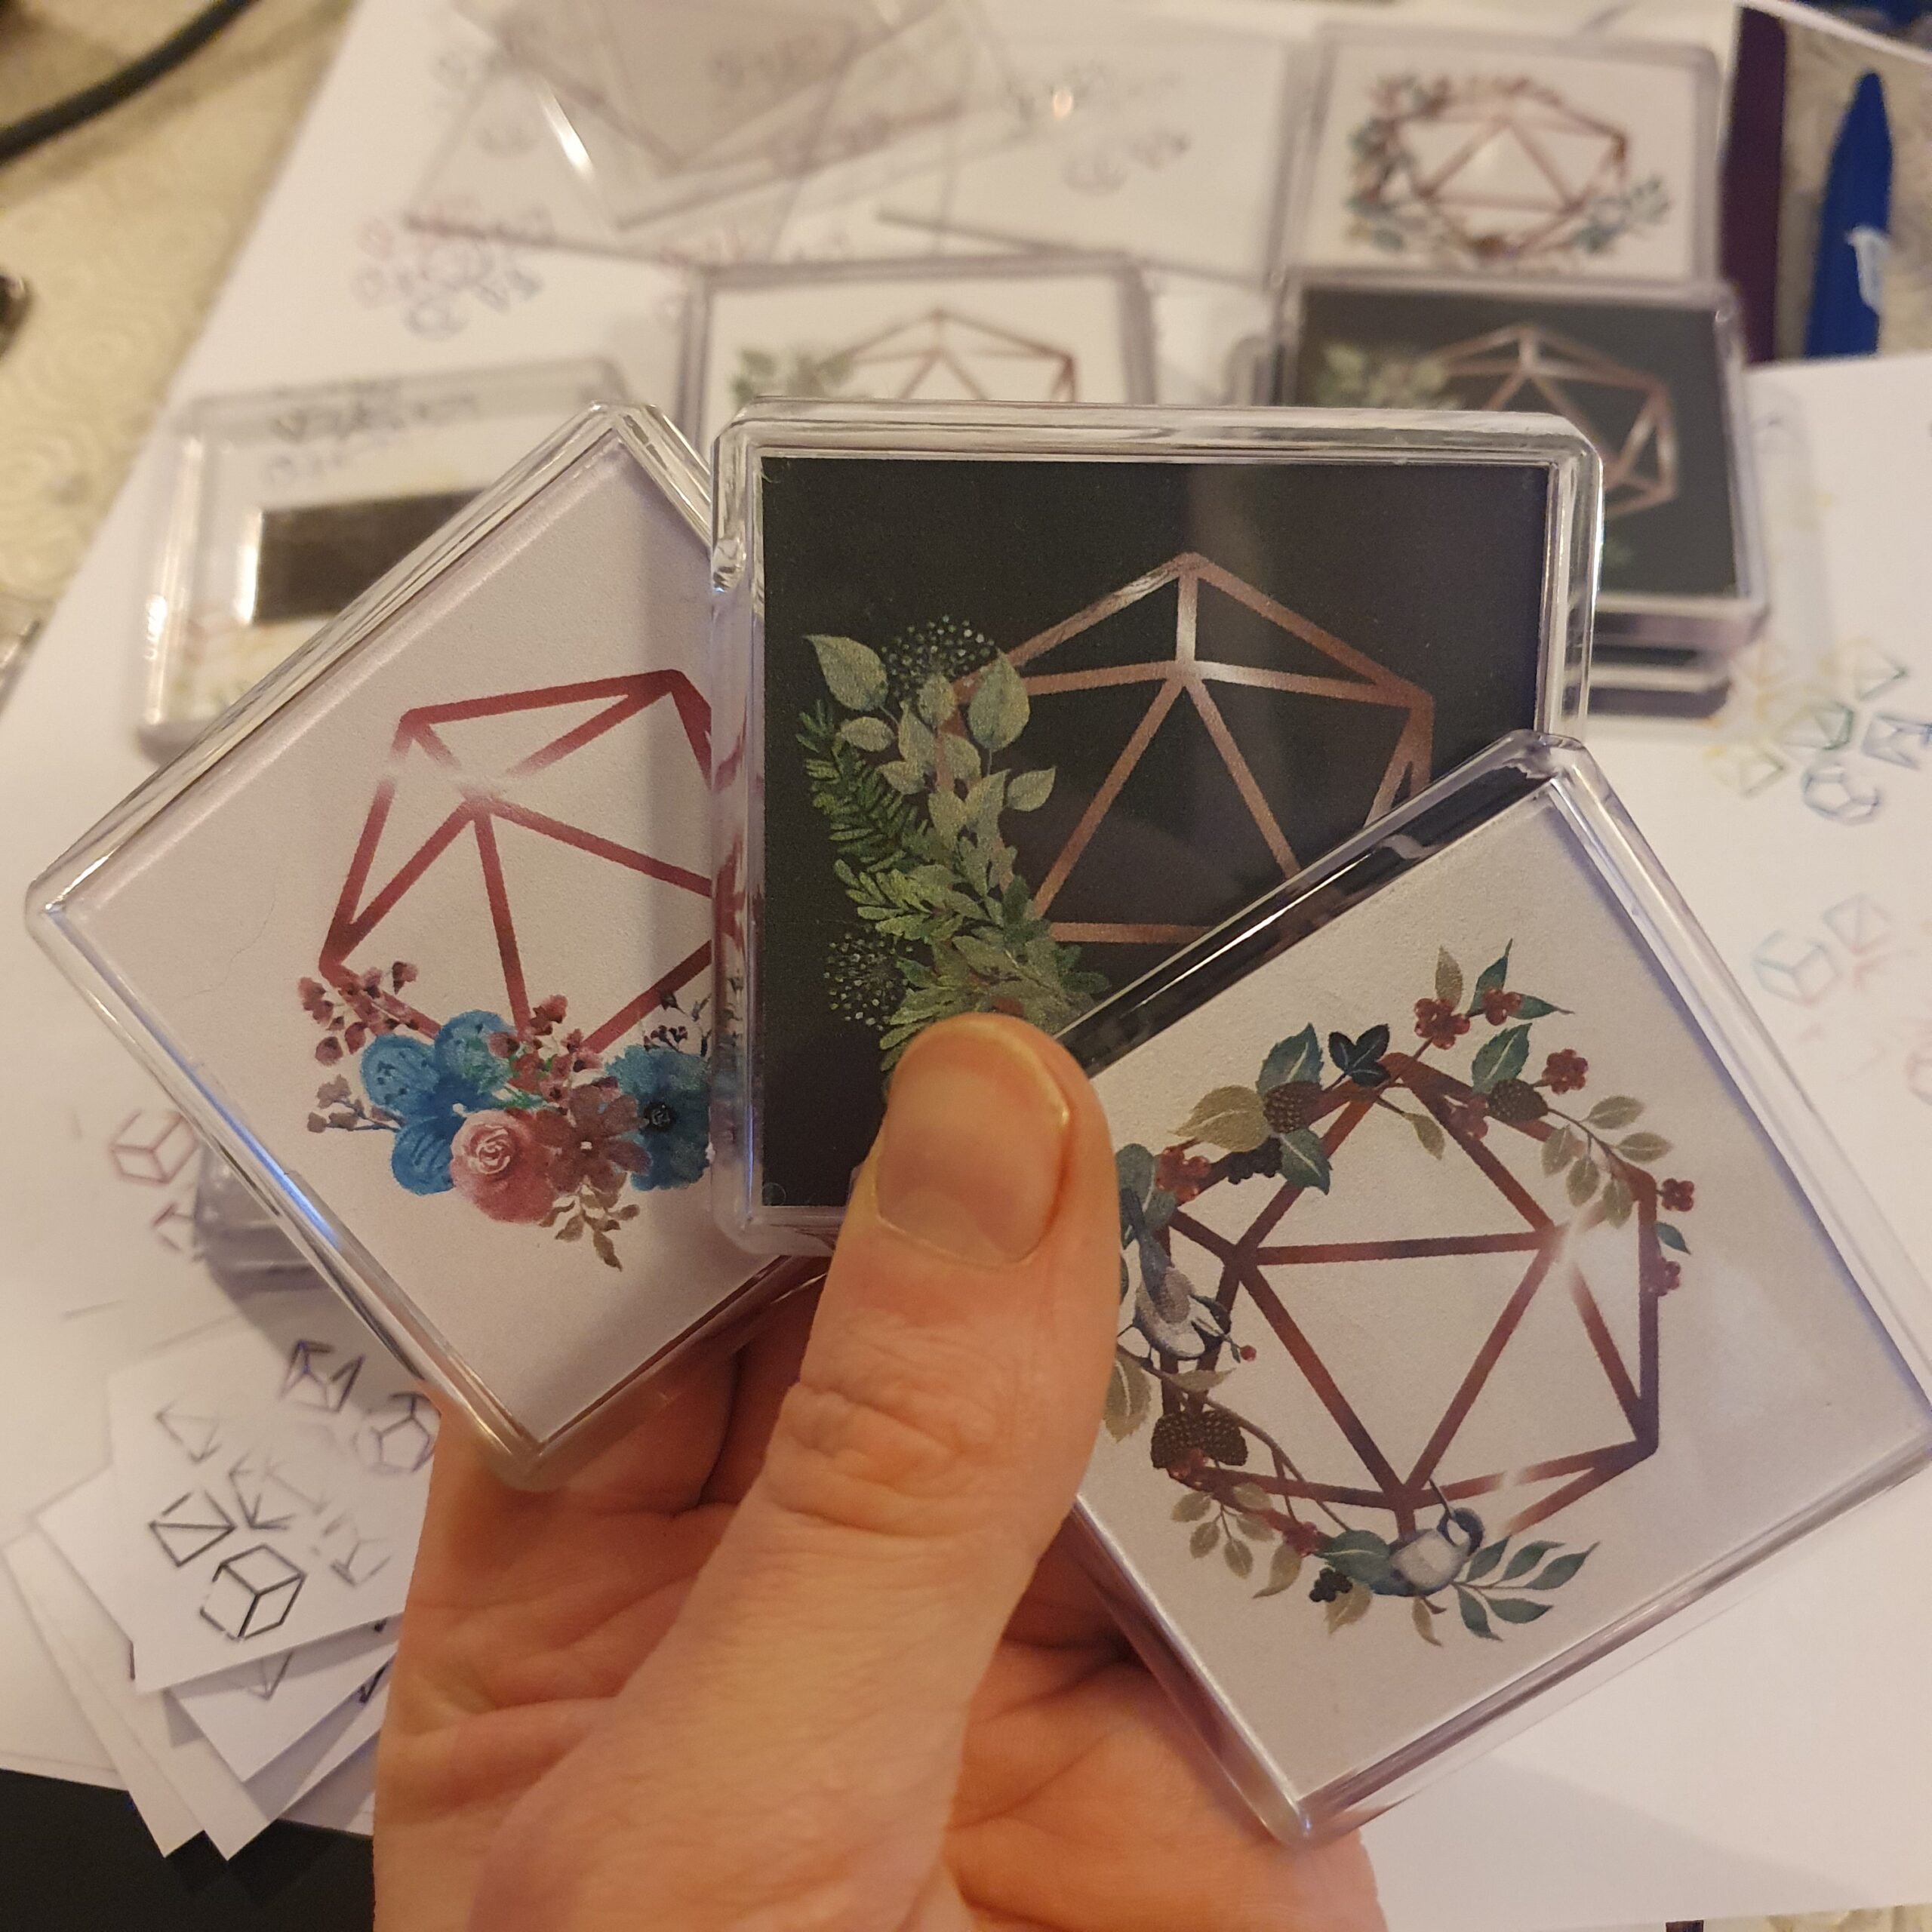 Three magnets containing a line image of a d20